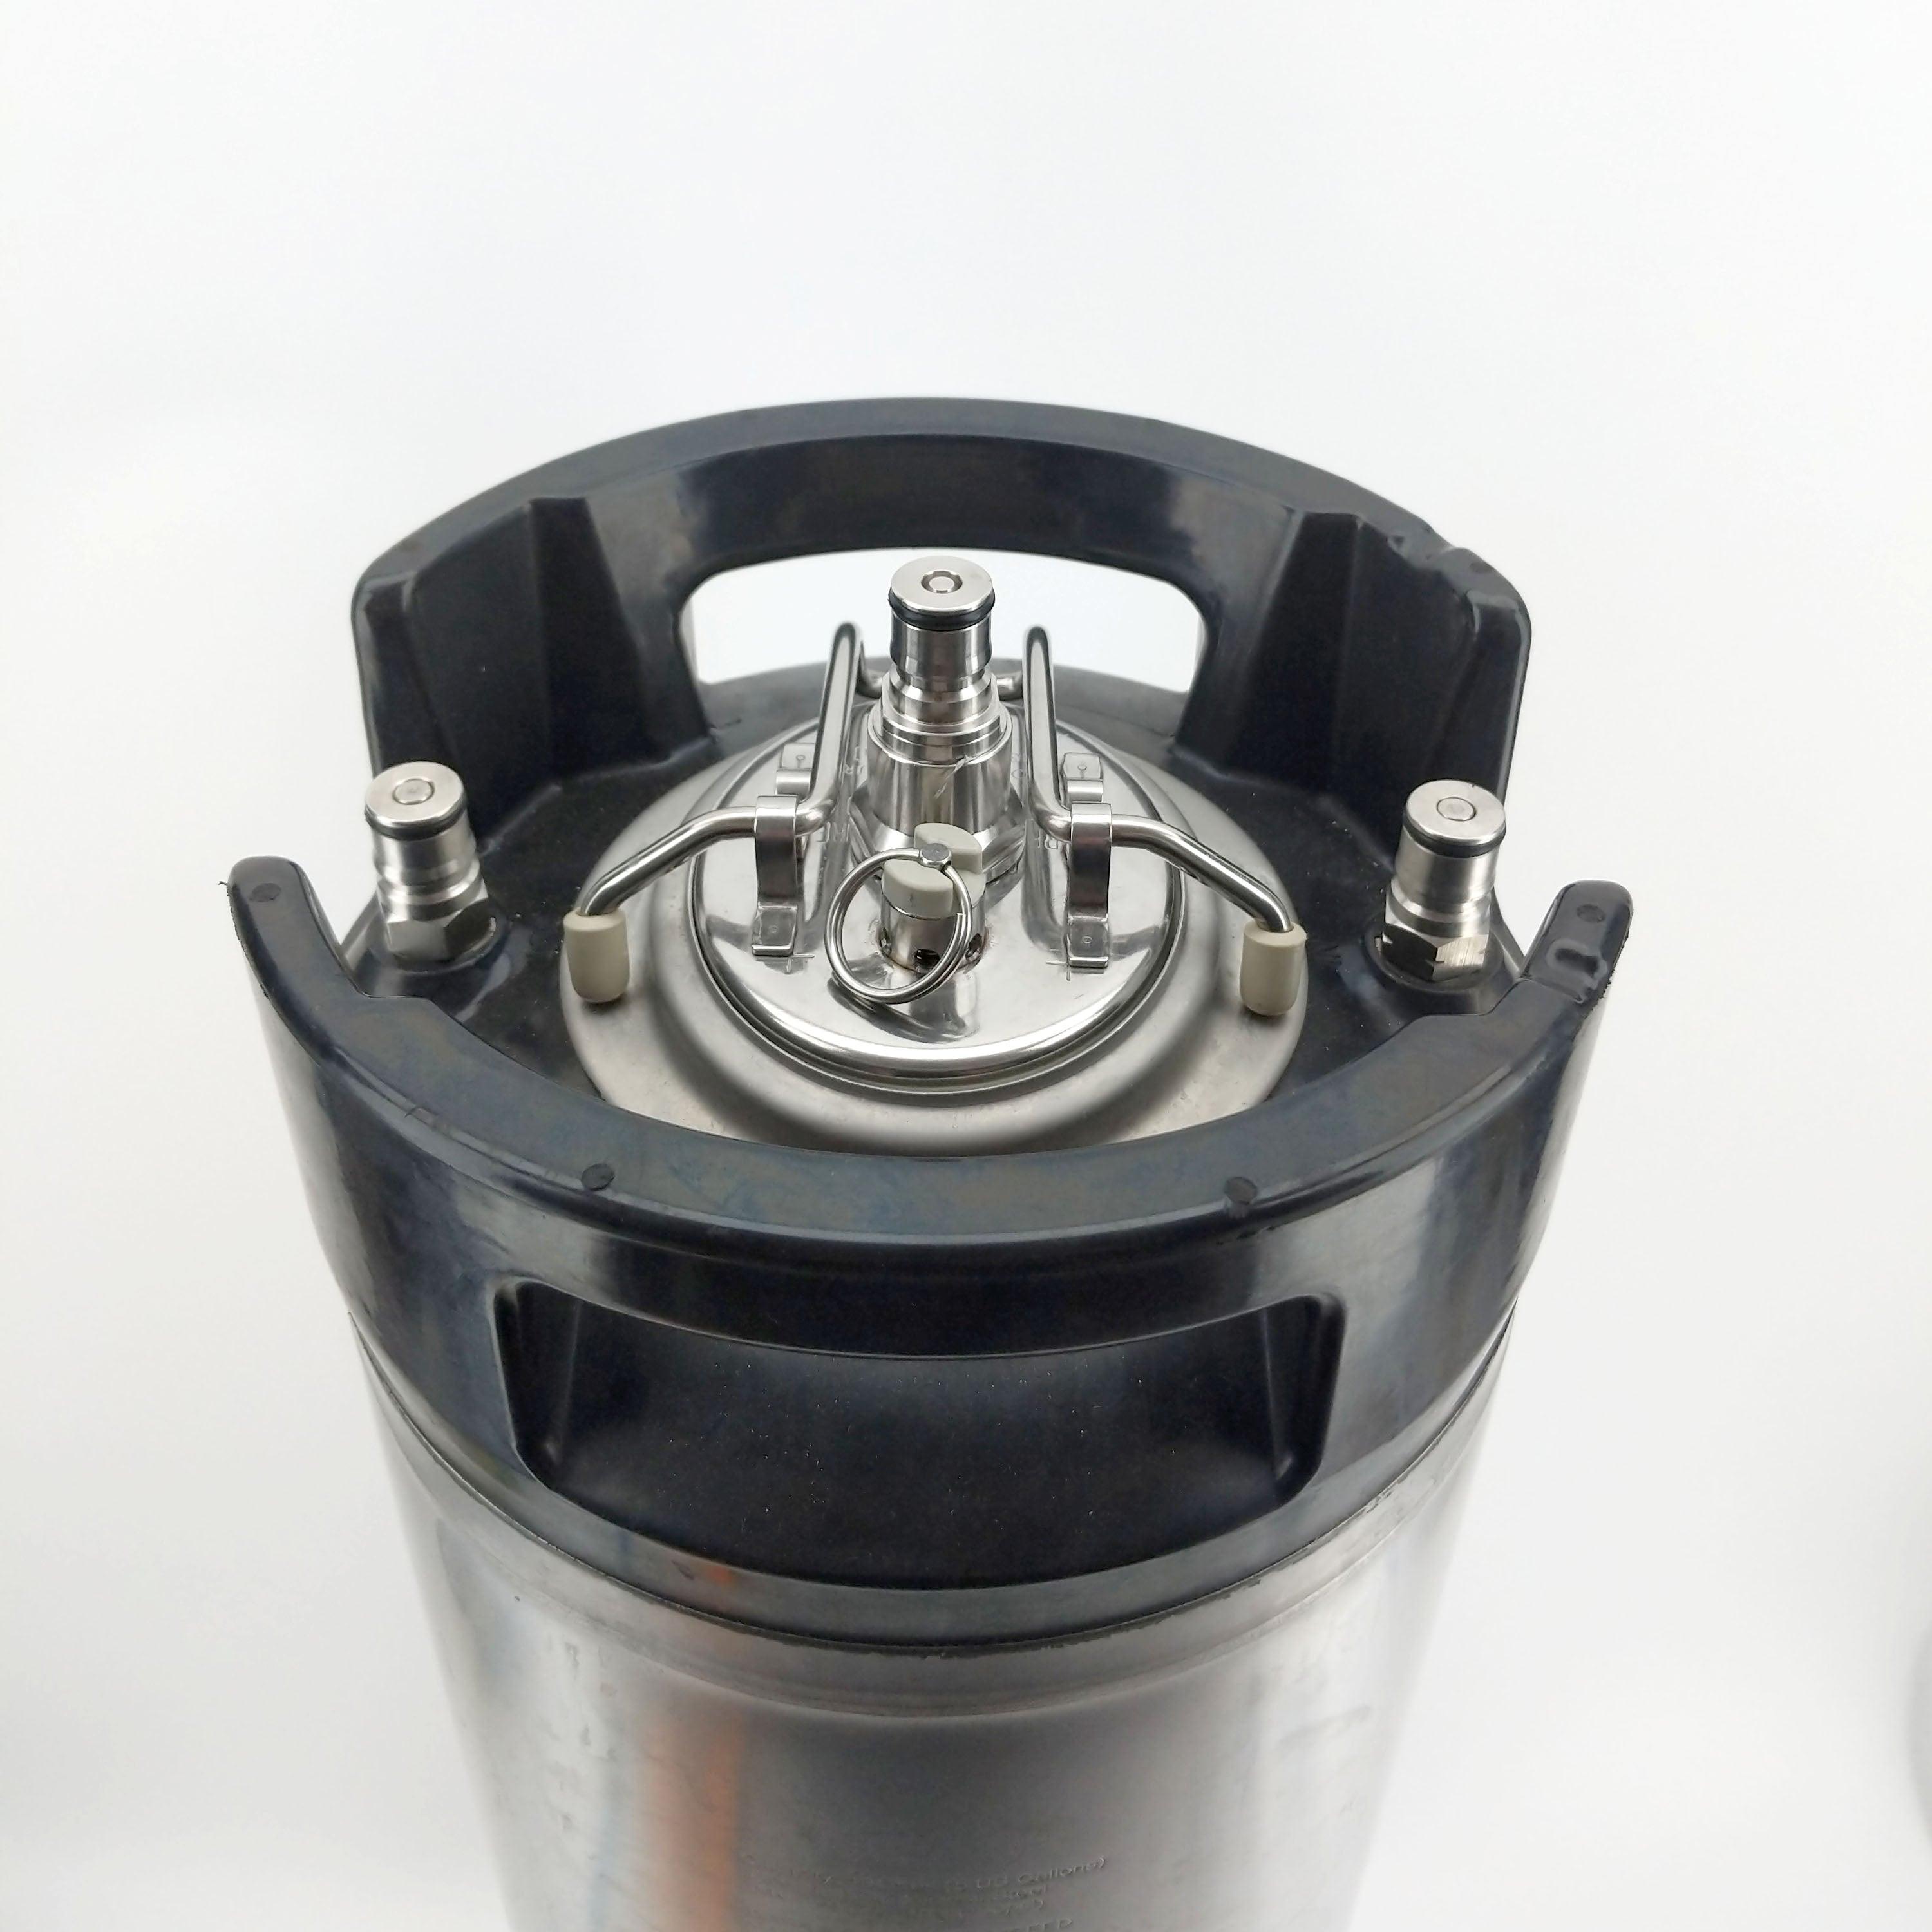 Carbonator Reactor - Carbonation Lid for Continuous Soda Water - KegLand